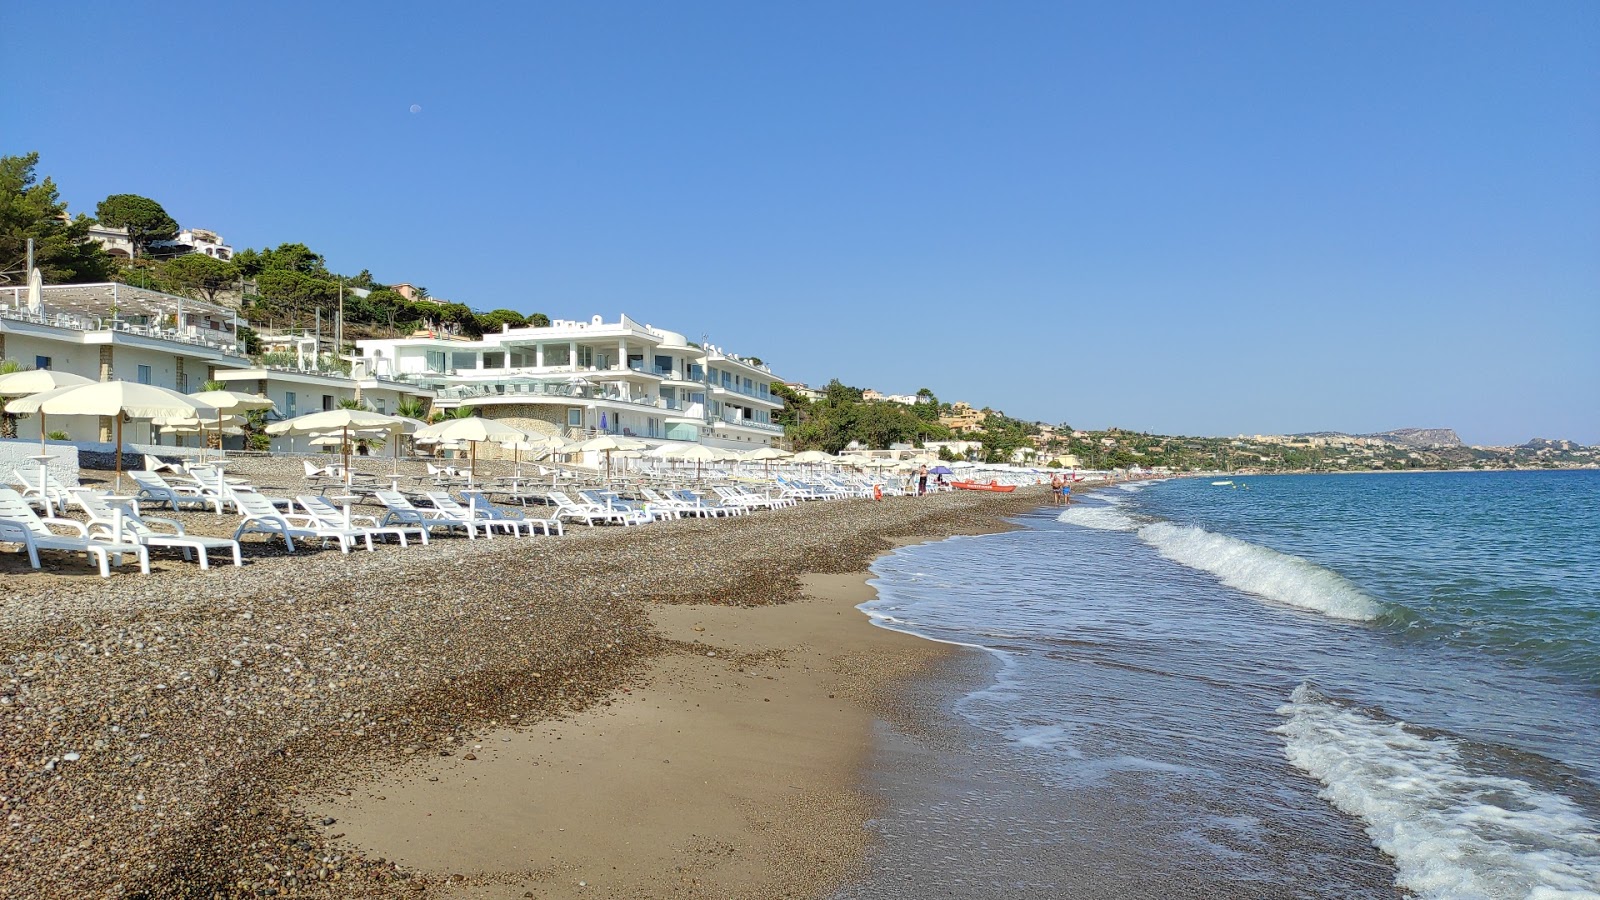 Photo of Lido Pagliacci with spacious shore